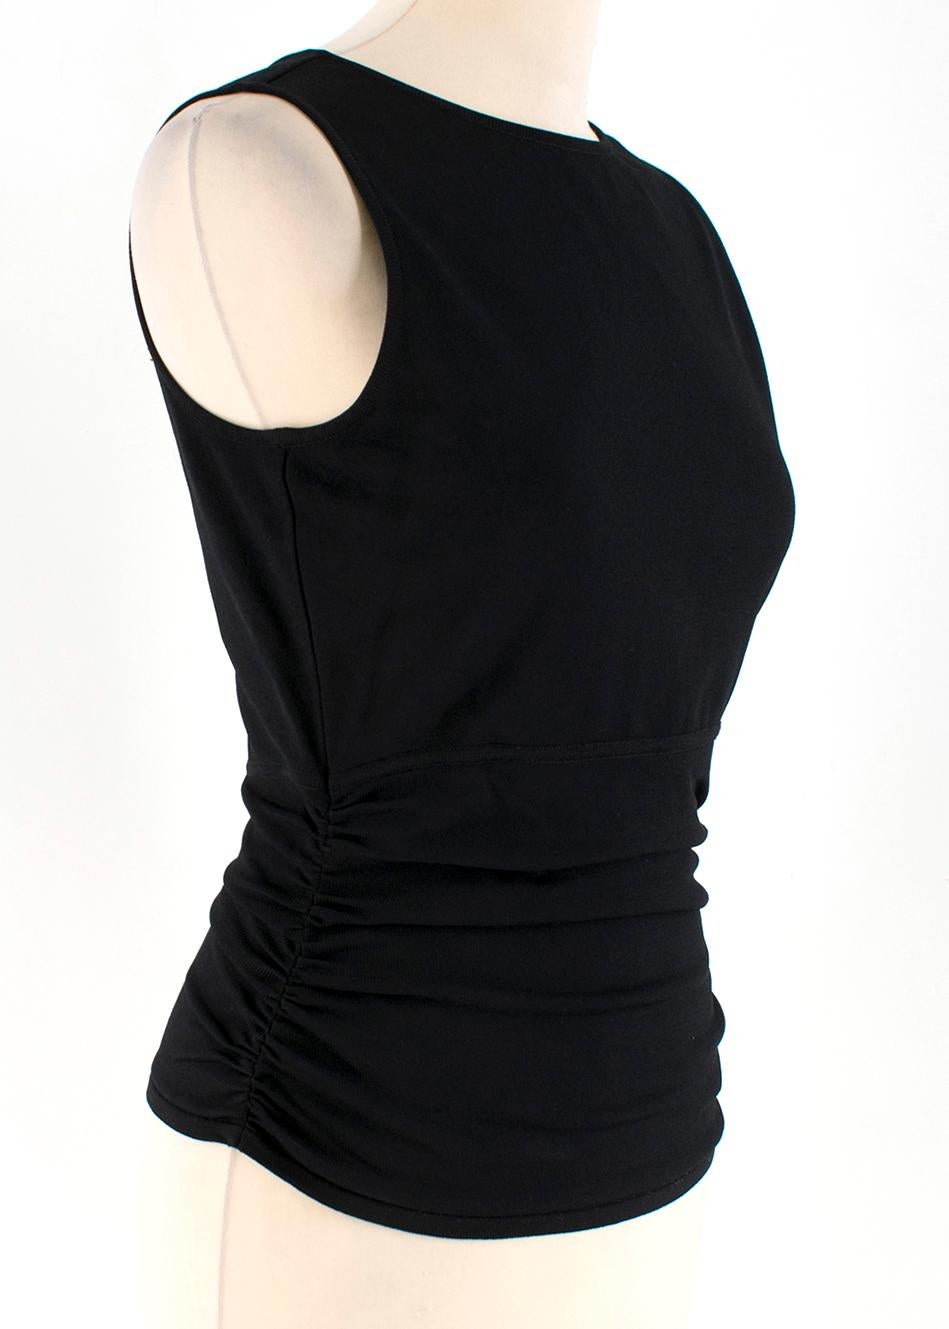 Gucci Black Fitted Sleeveless Top

- Black slim fit sleeveless top
- Round neck
- Gathered detailing on both sides
- Thin cutout on the back

Please note, these items are pre-owned and may show some signs of storage, even when unworn and unused.